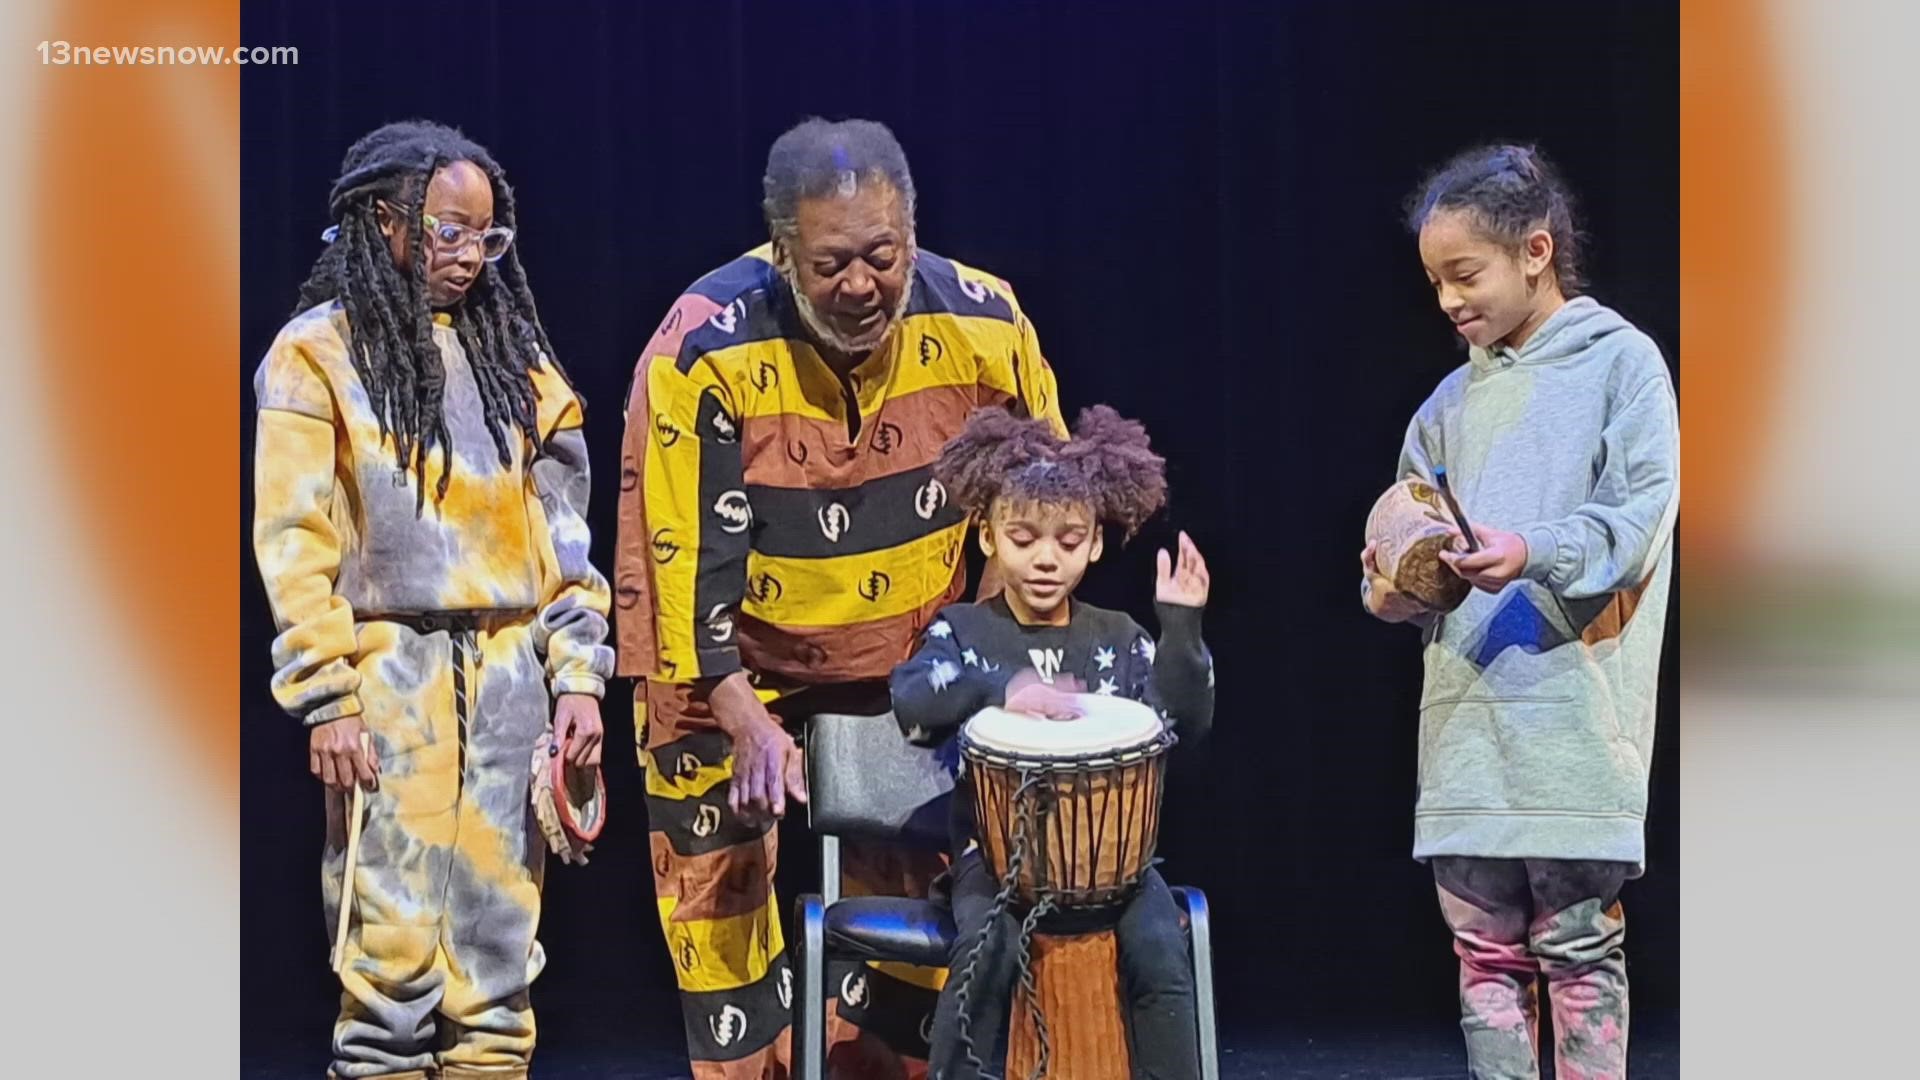 One organization is hosting several free performances and programs across Hampton Roads to highlight African American art and culture throughout the year.